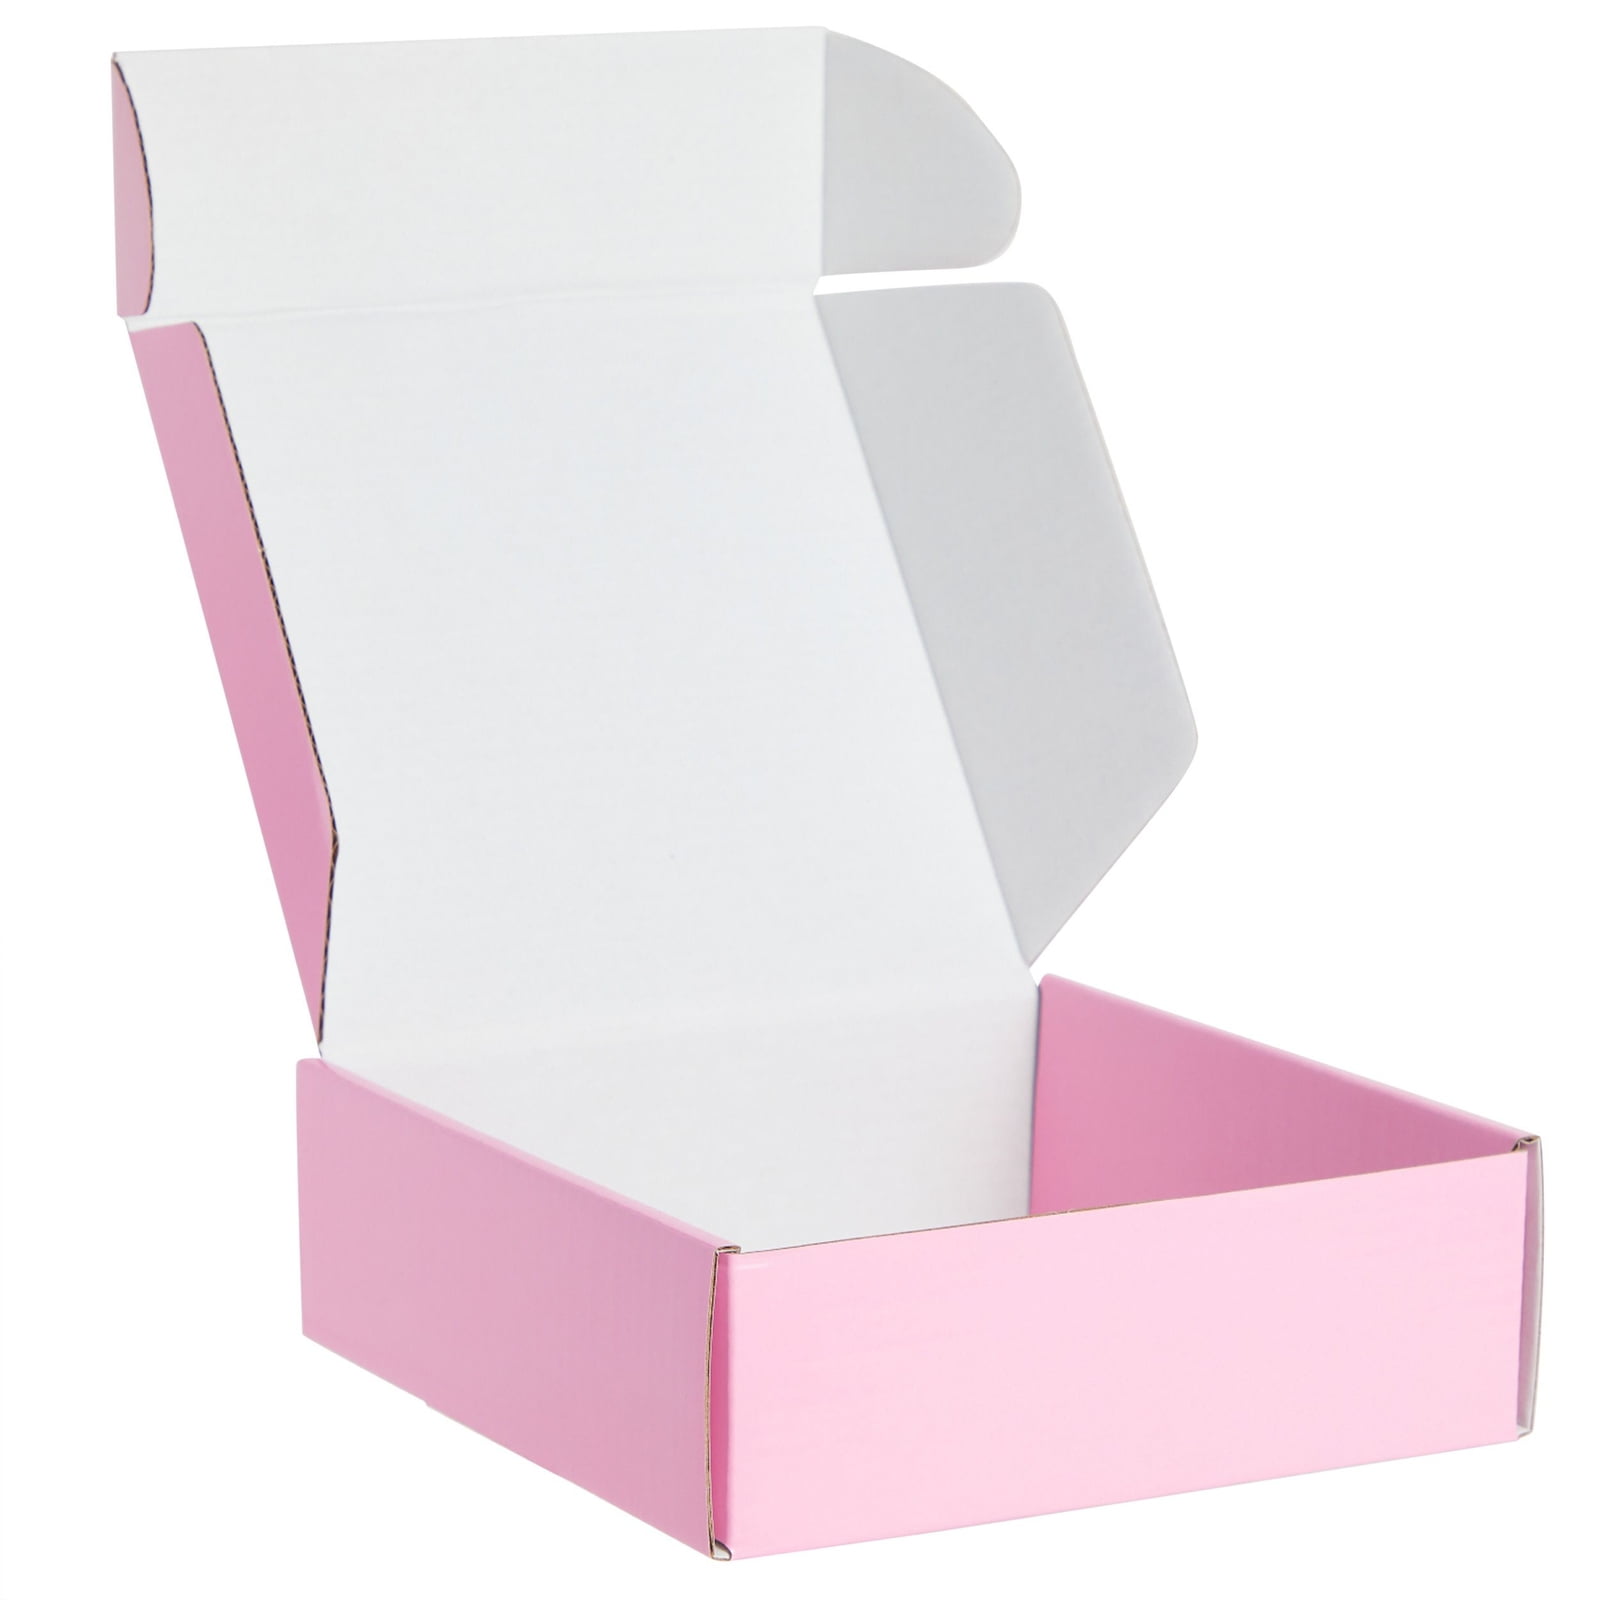  Soxuding Pink Shipping Boxes 6x6x2in - Pack of 20 Recyclable  Small Cardboard Corrugated Mailer Boxes For Small Business Packaging  Shipping Gift Boxes : Office Products